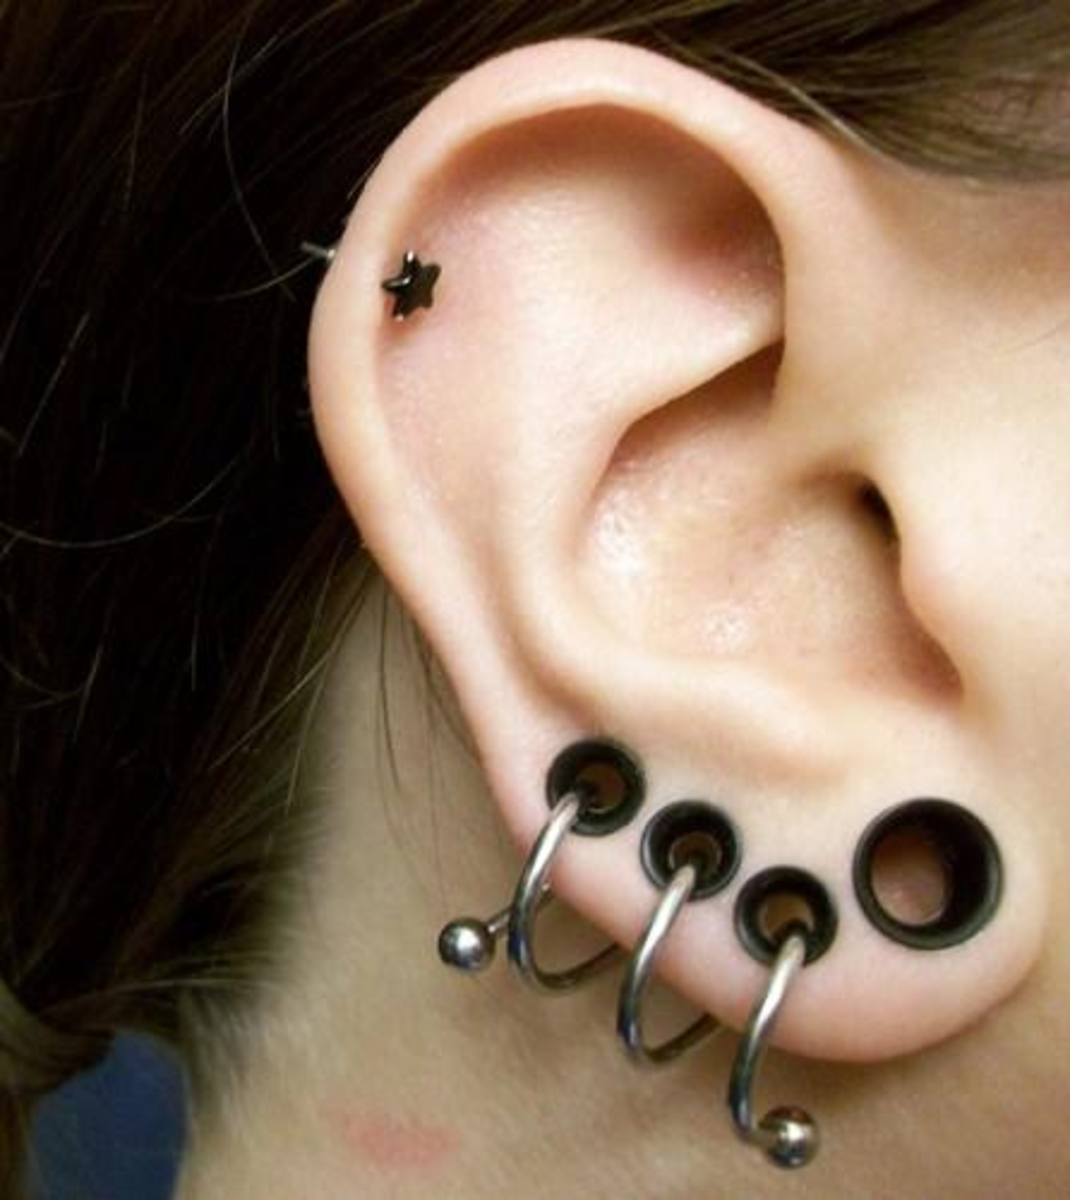 These are flesh tunnel gauges with a spiral shaped captive running through them.